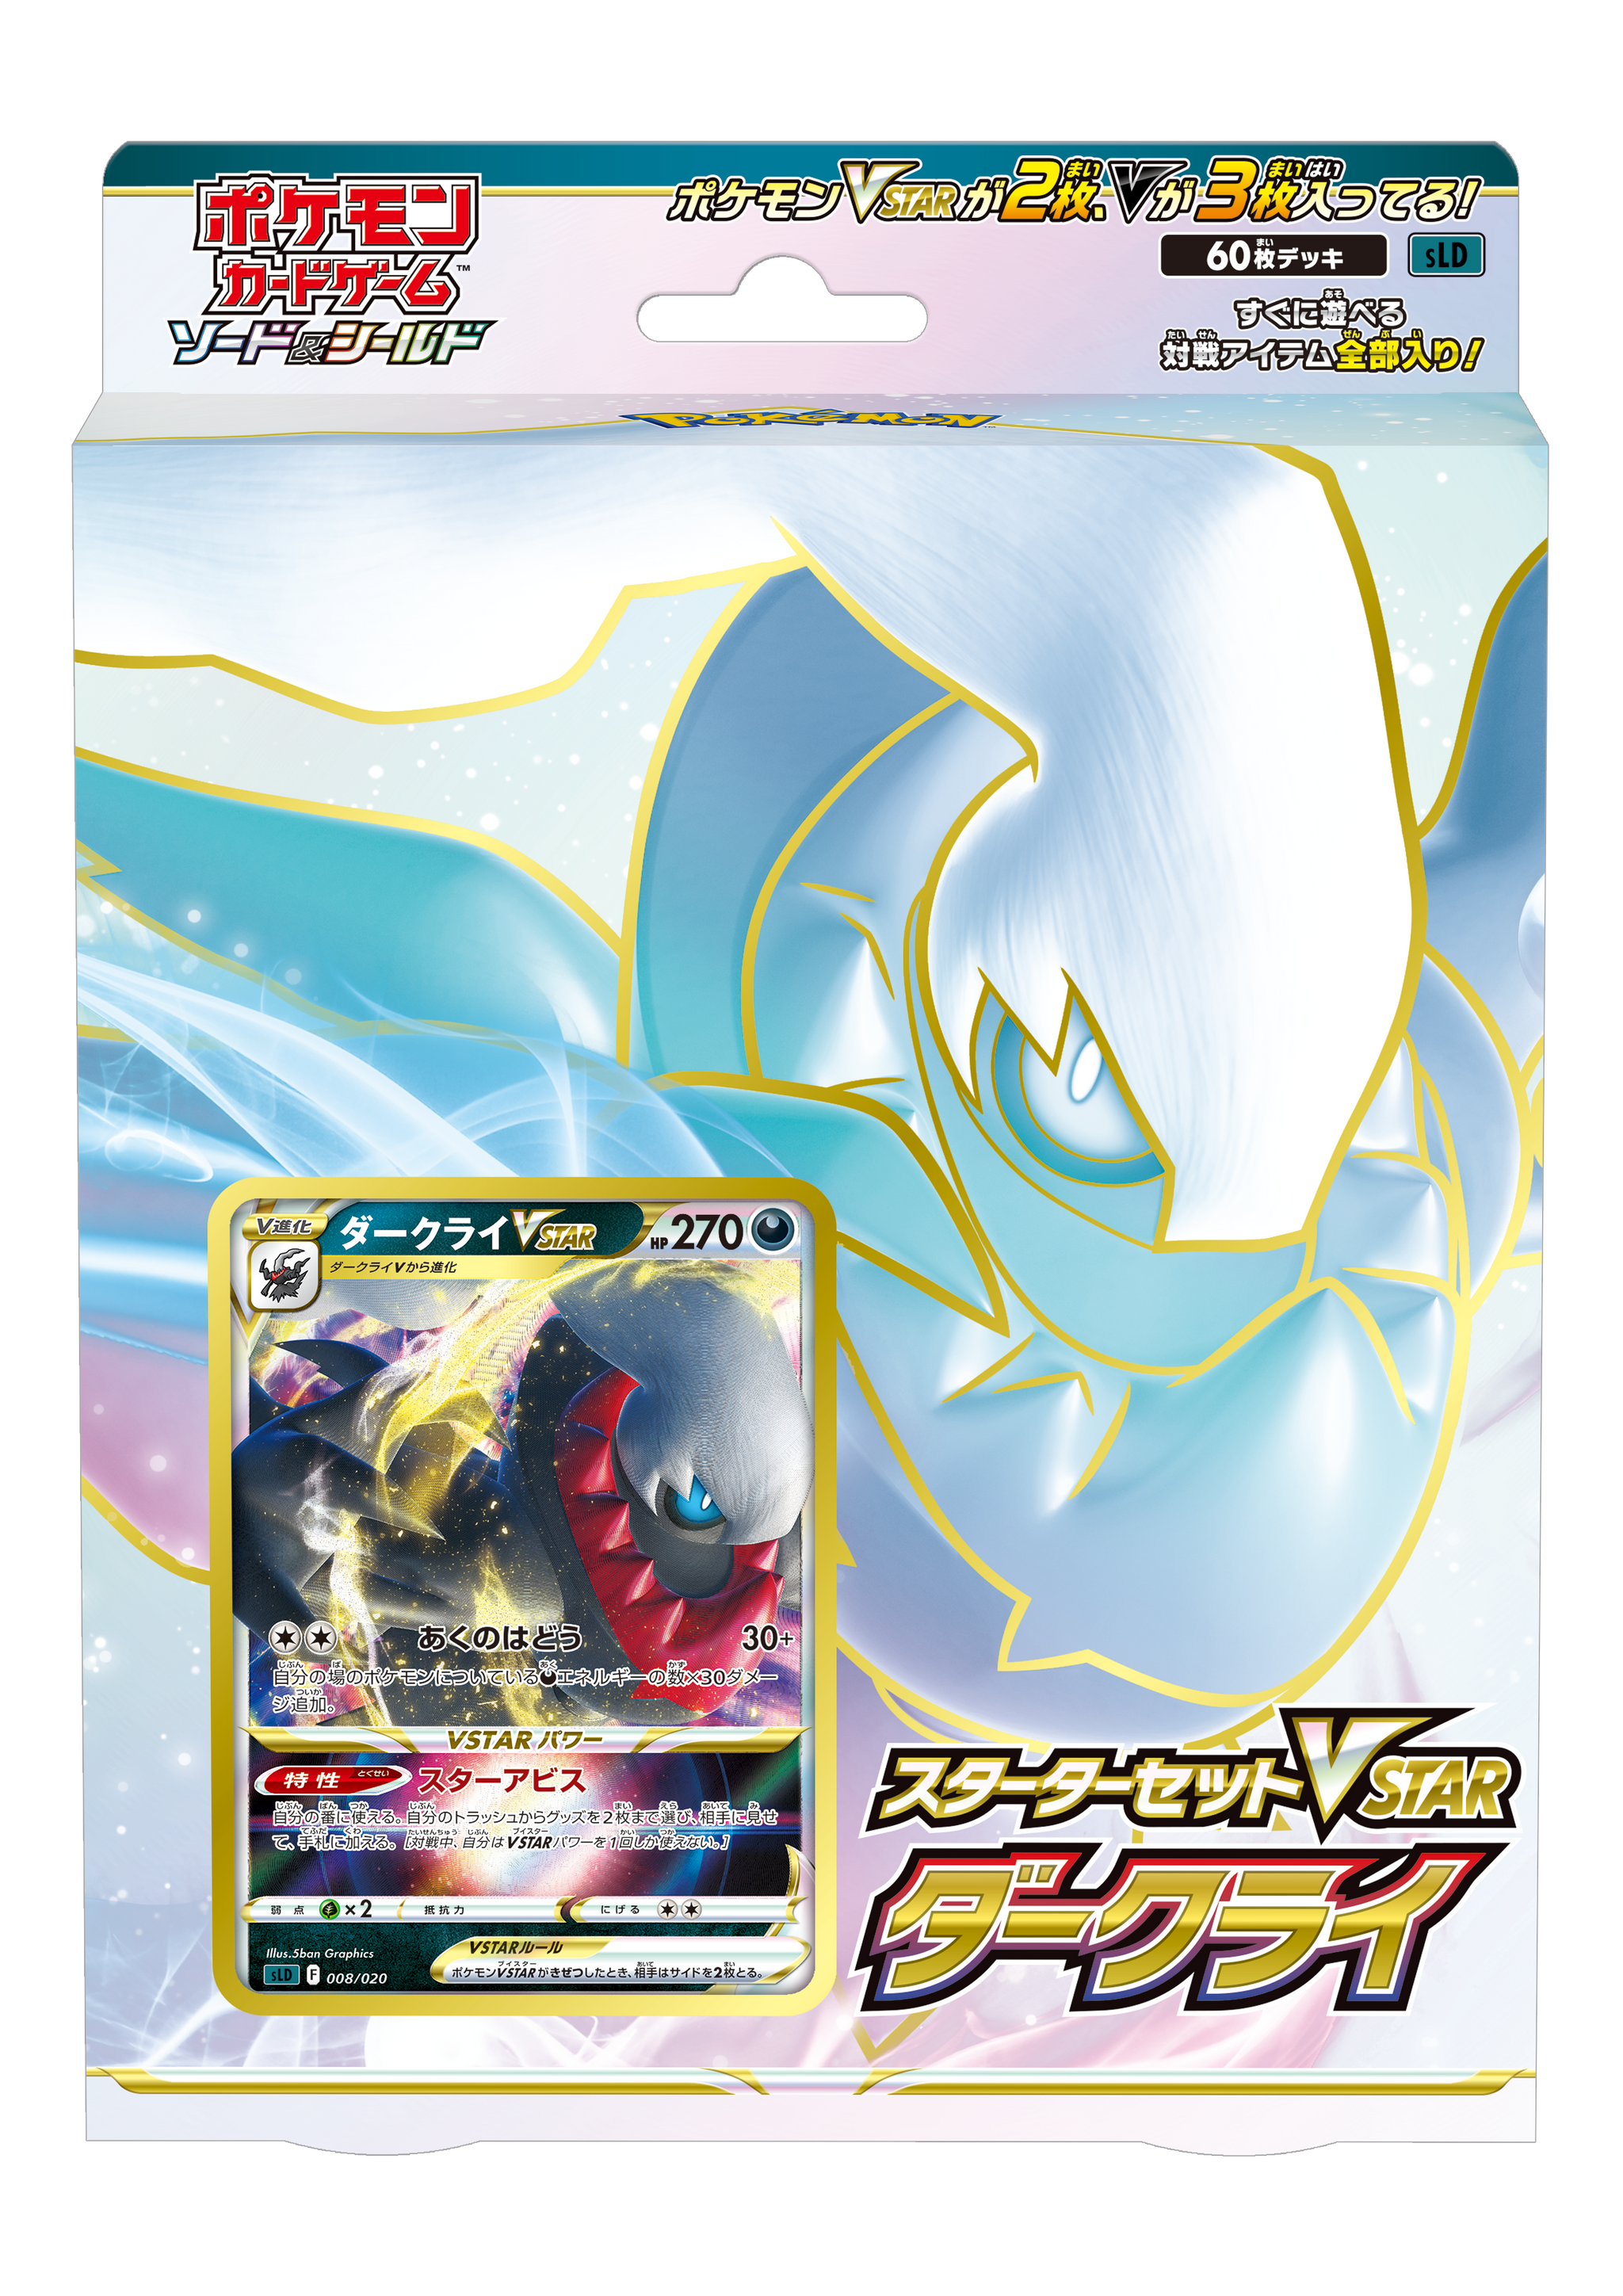 Pokémon TCG Japan Has Released Giratina-Themed Lost Abyss